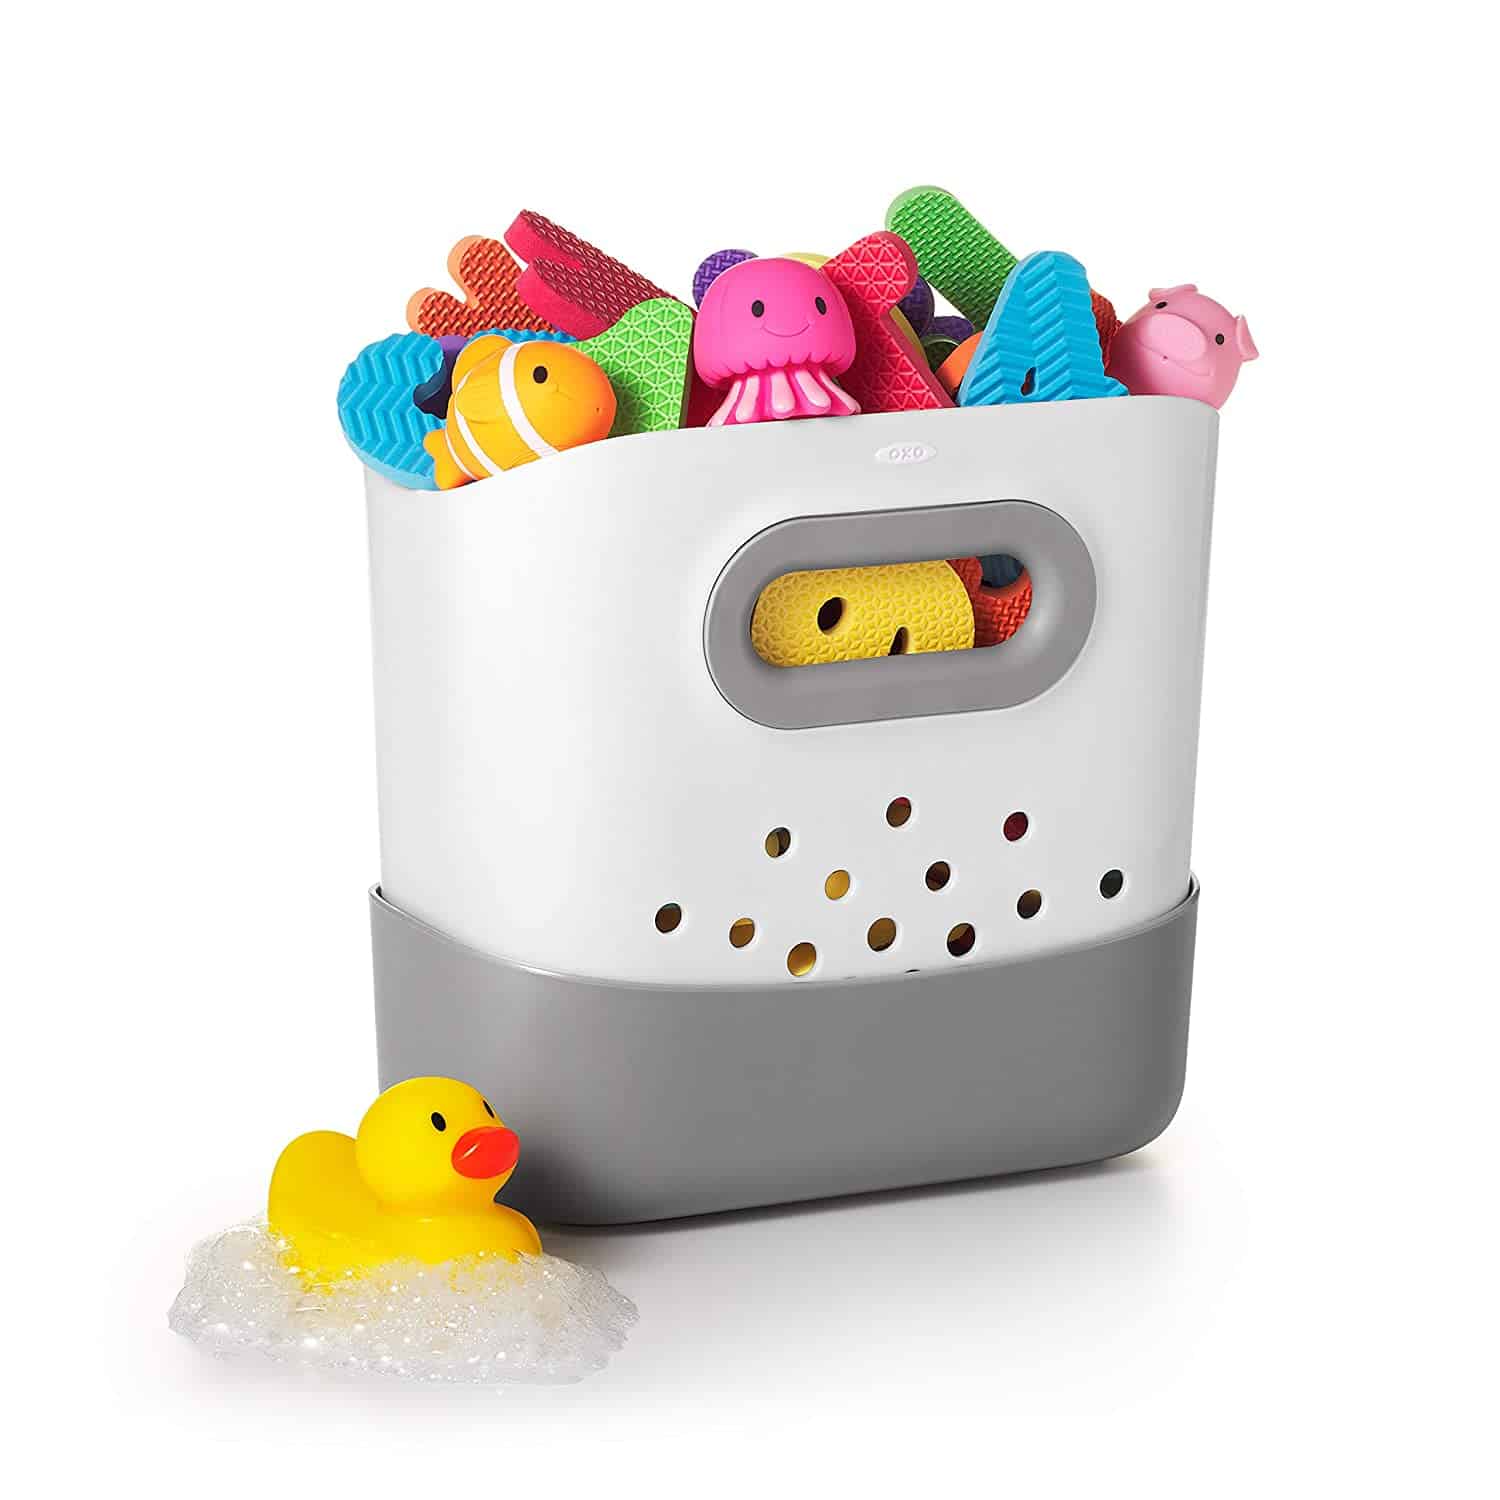 https://www.makingmanzanita.com/wp-content/uploads/2023/03/stand-up-bath-toy-basket-gray-and-white-from-OXO.jpg